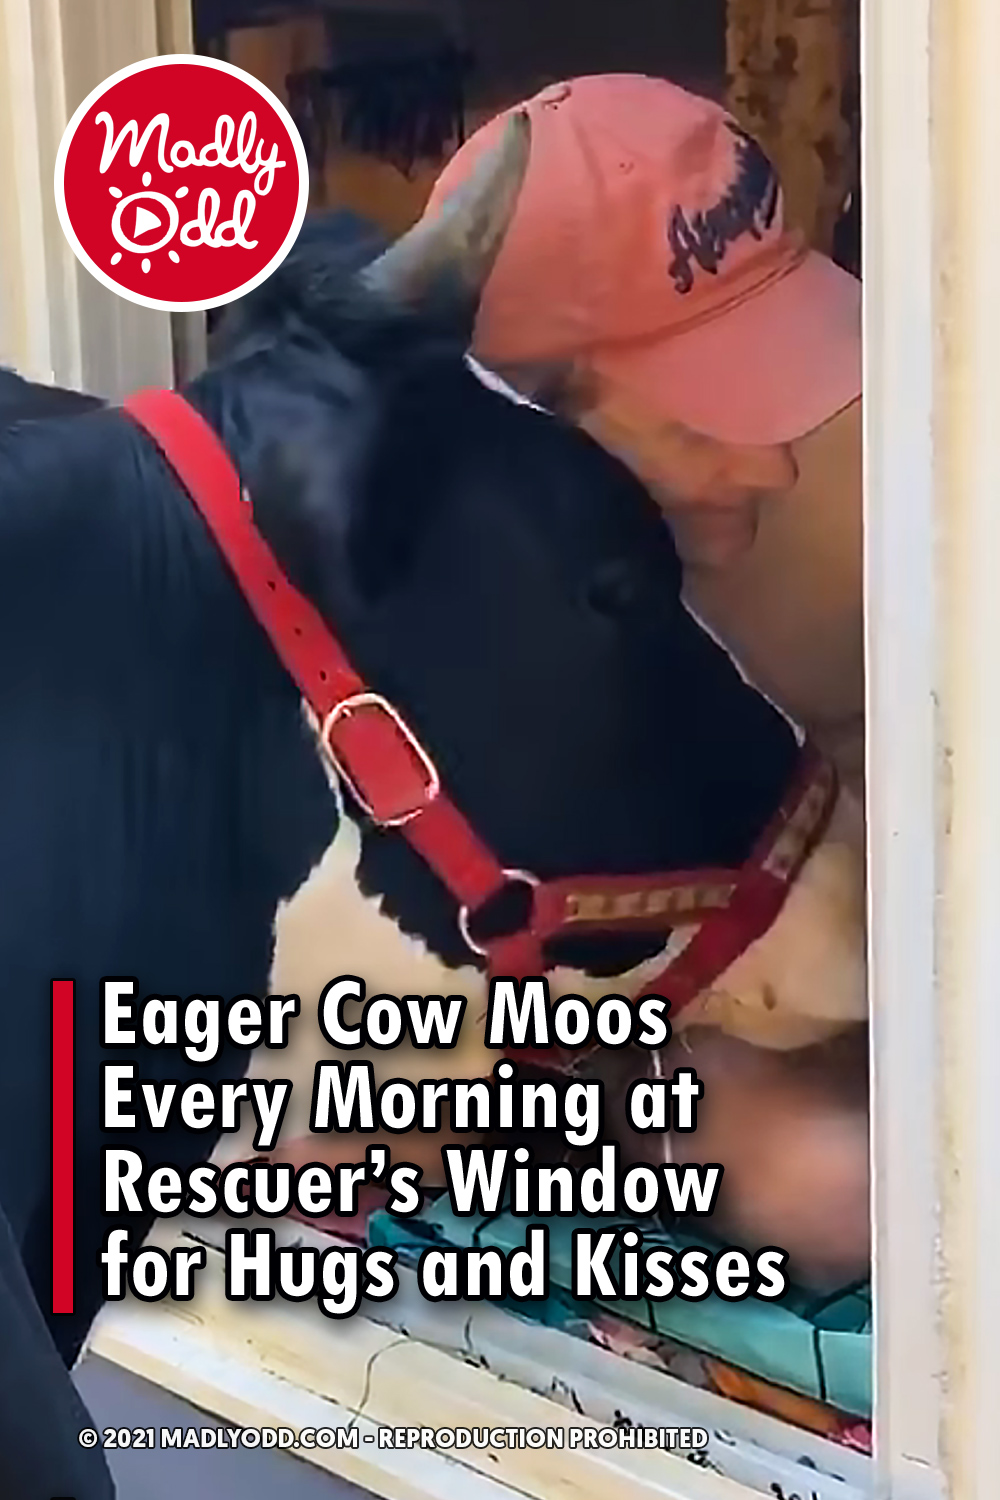 Eager Cow Moos Every Morning at Rescuer’s Window for Hugs and Kisses